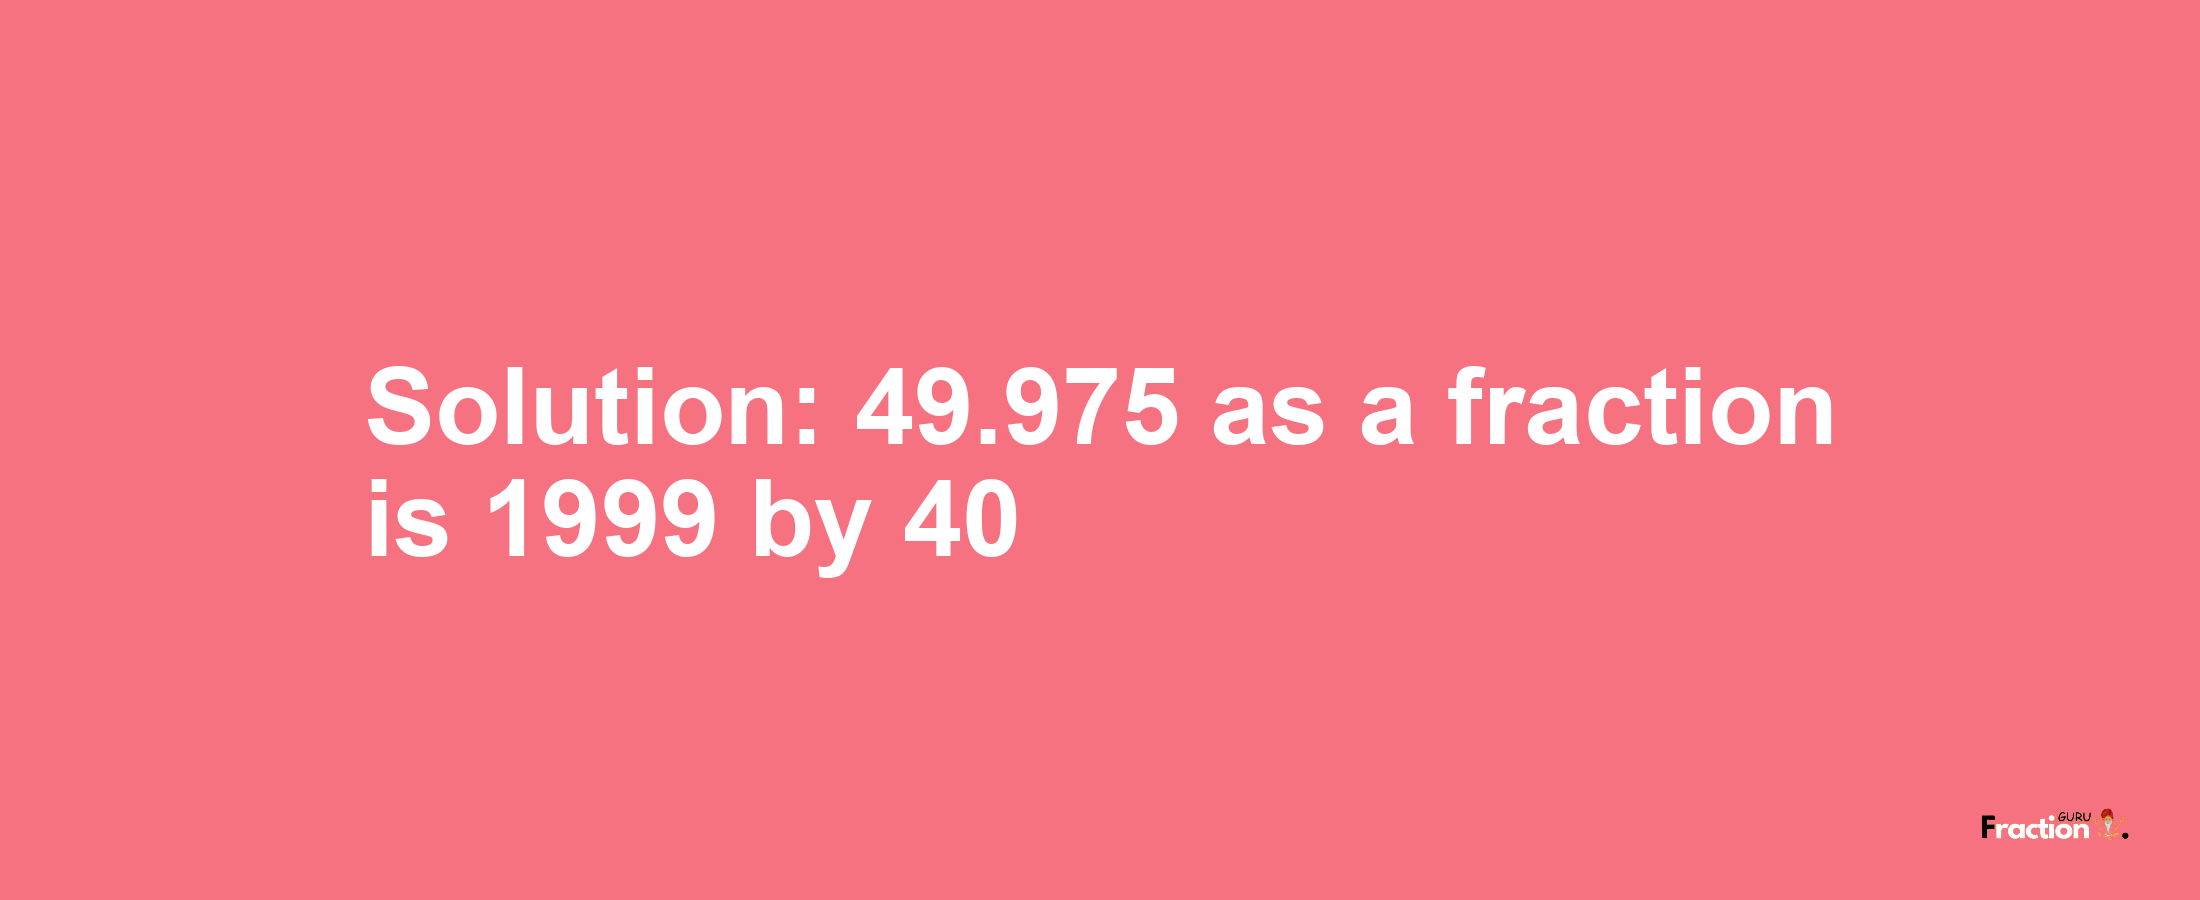 Solution:49.975 as a fraction is 1999/40